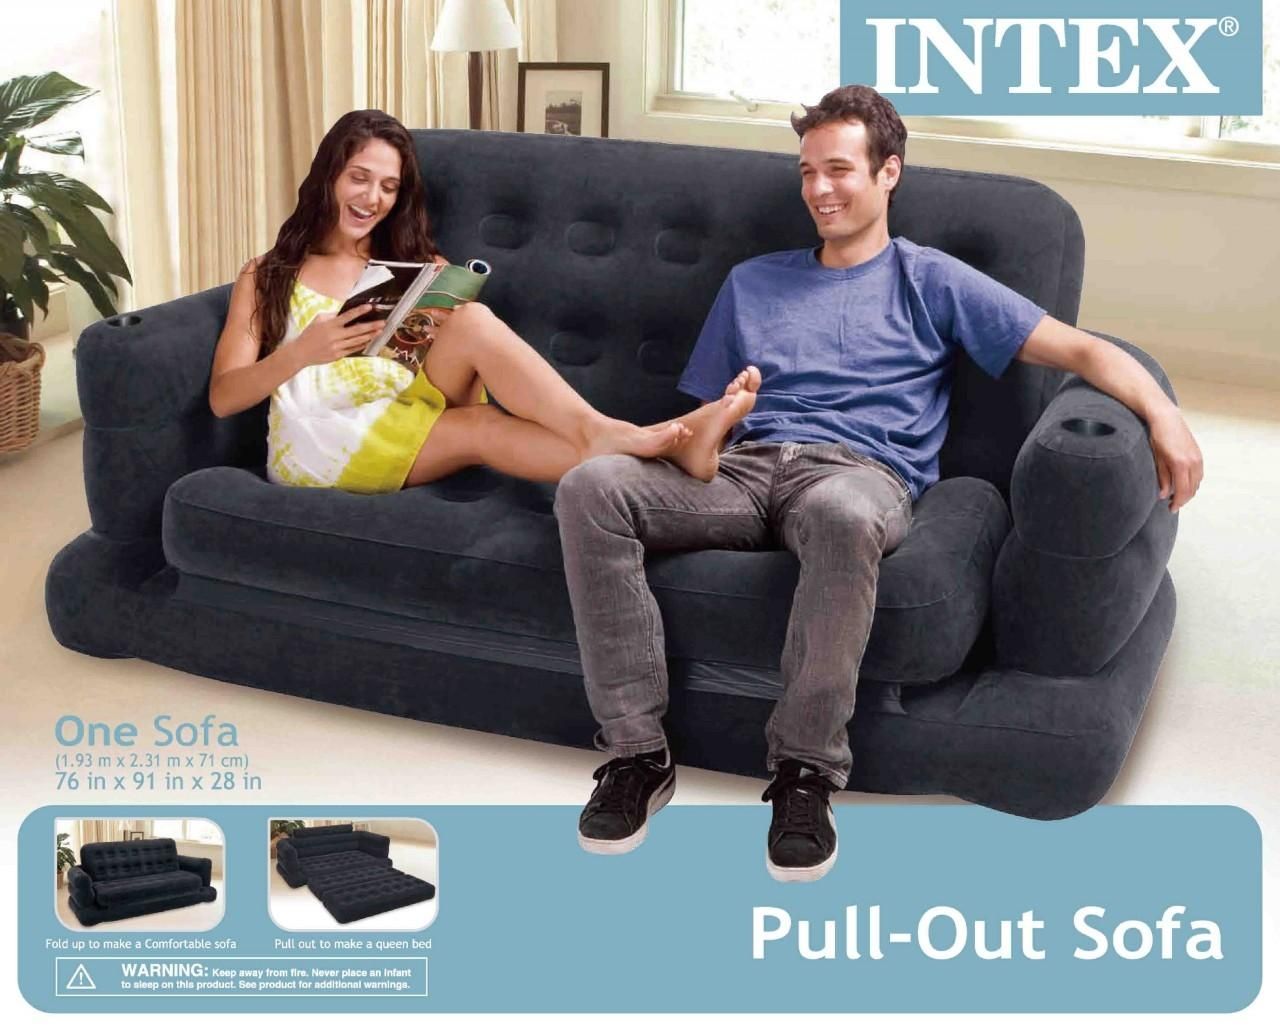 Intex Inflatable Pull Out Sofa And Queen Air Mattress Pertaining To Inflatable Pull Out Sofas (View 6 of 20)